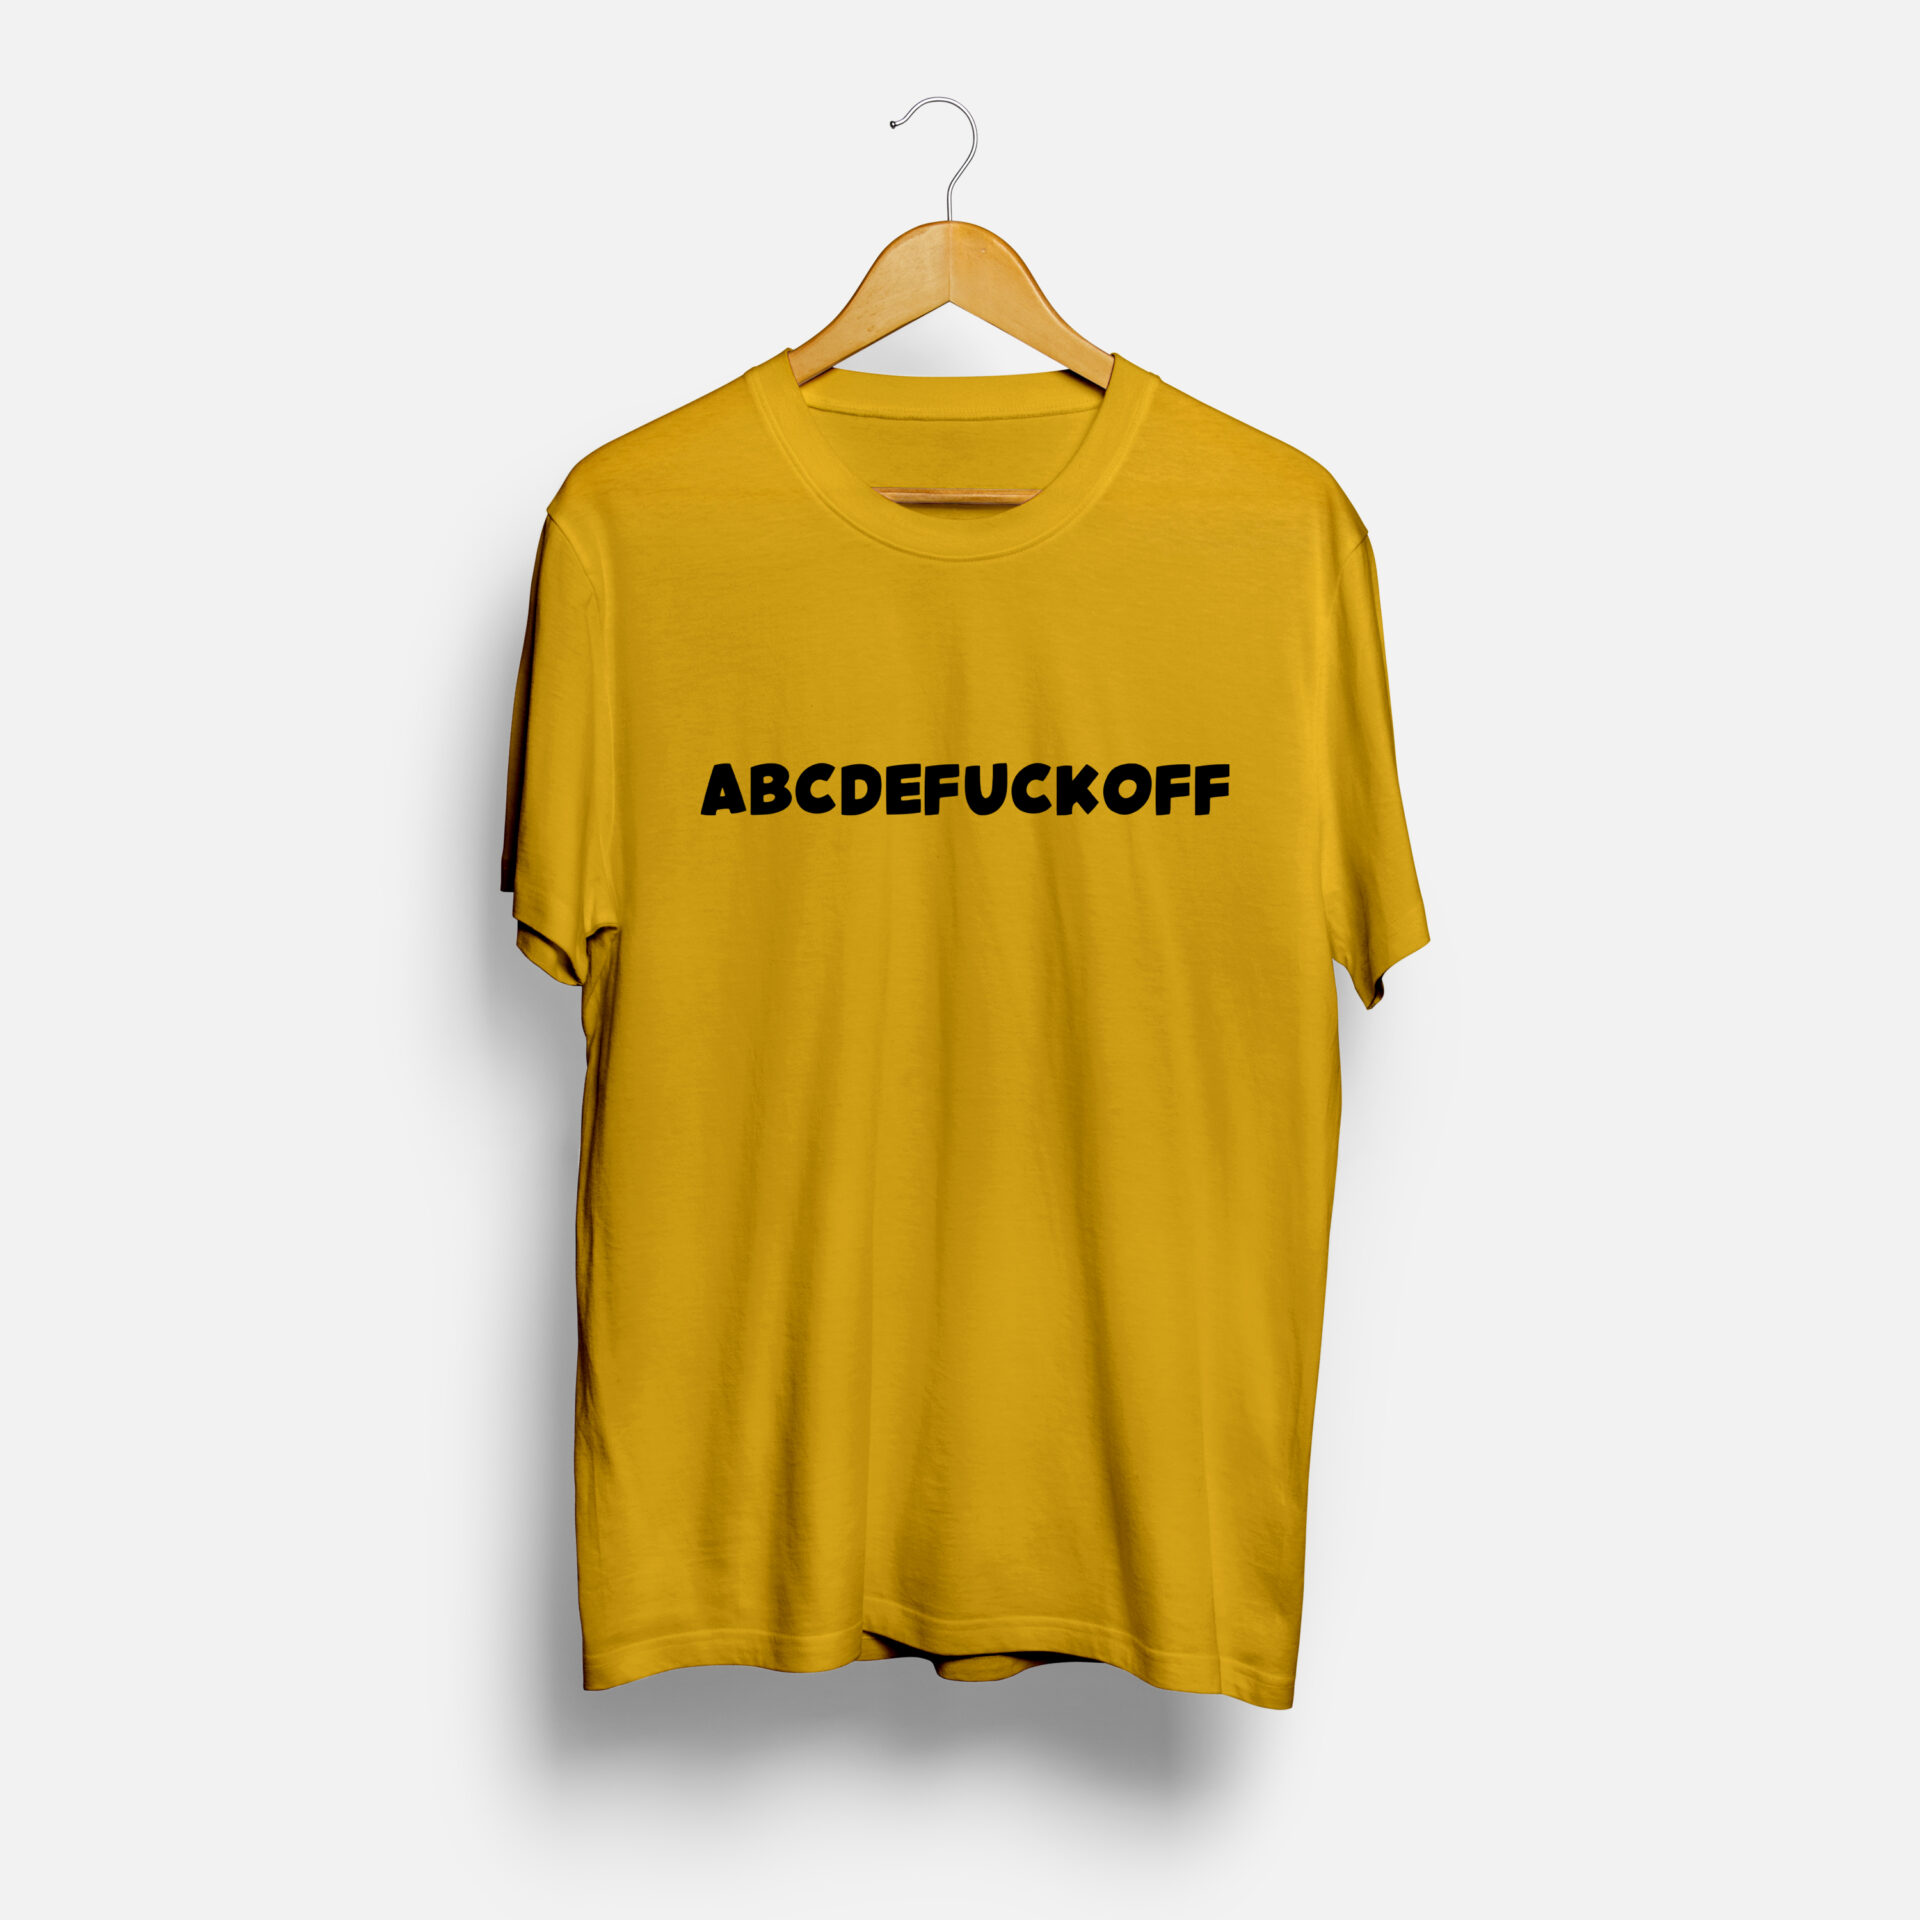 ABCDEFGH  FUCK OFF CUSTOMISED ROUND NECK TSHIRT